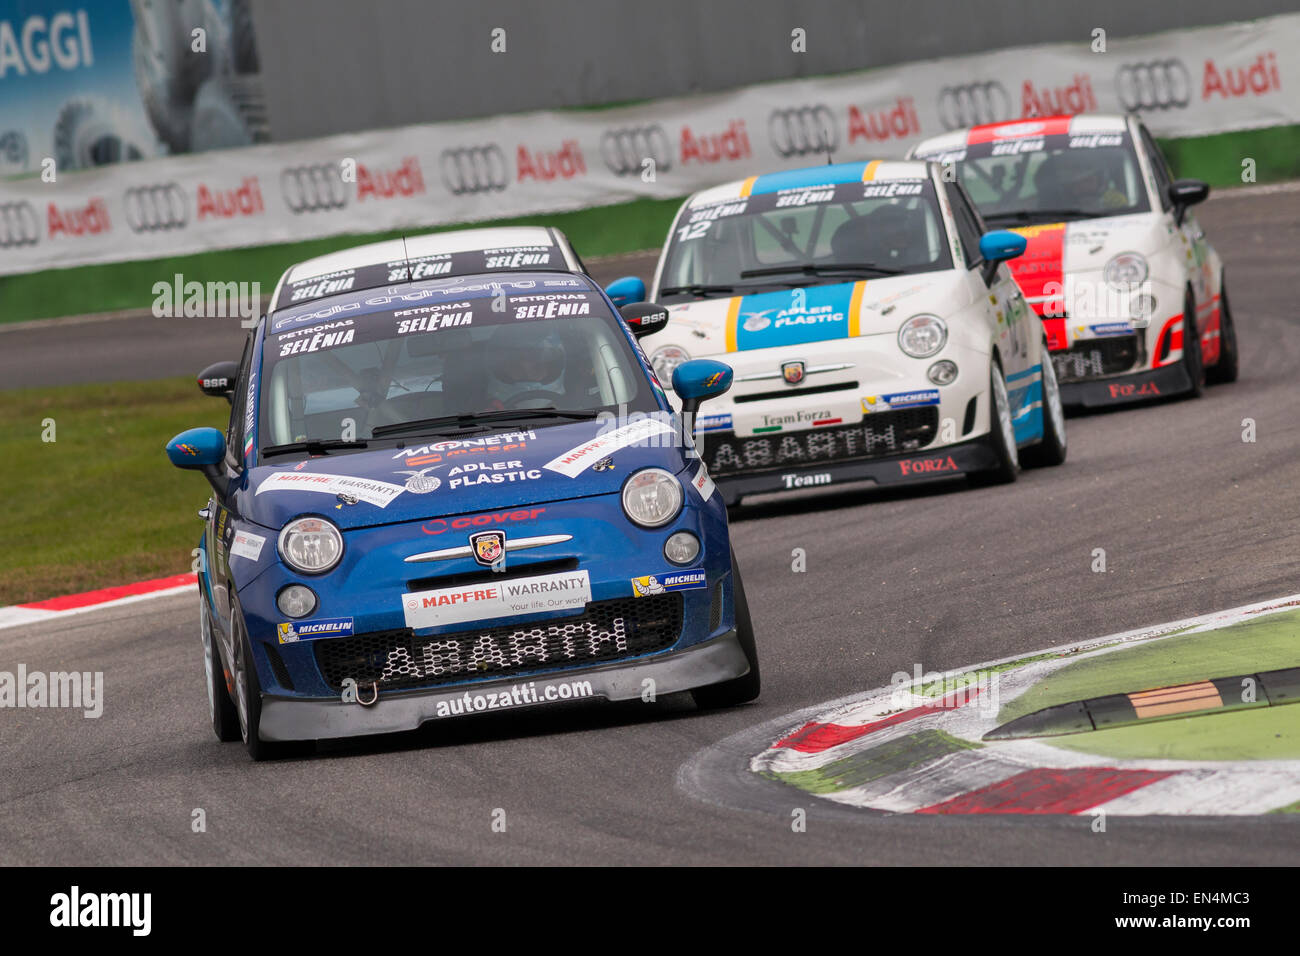 Monza, Italy - October 25, 2014: Fiat Abarth 695 of  C&C Racing  Team, driven by Campani Alex Stock Photo